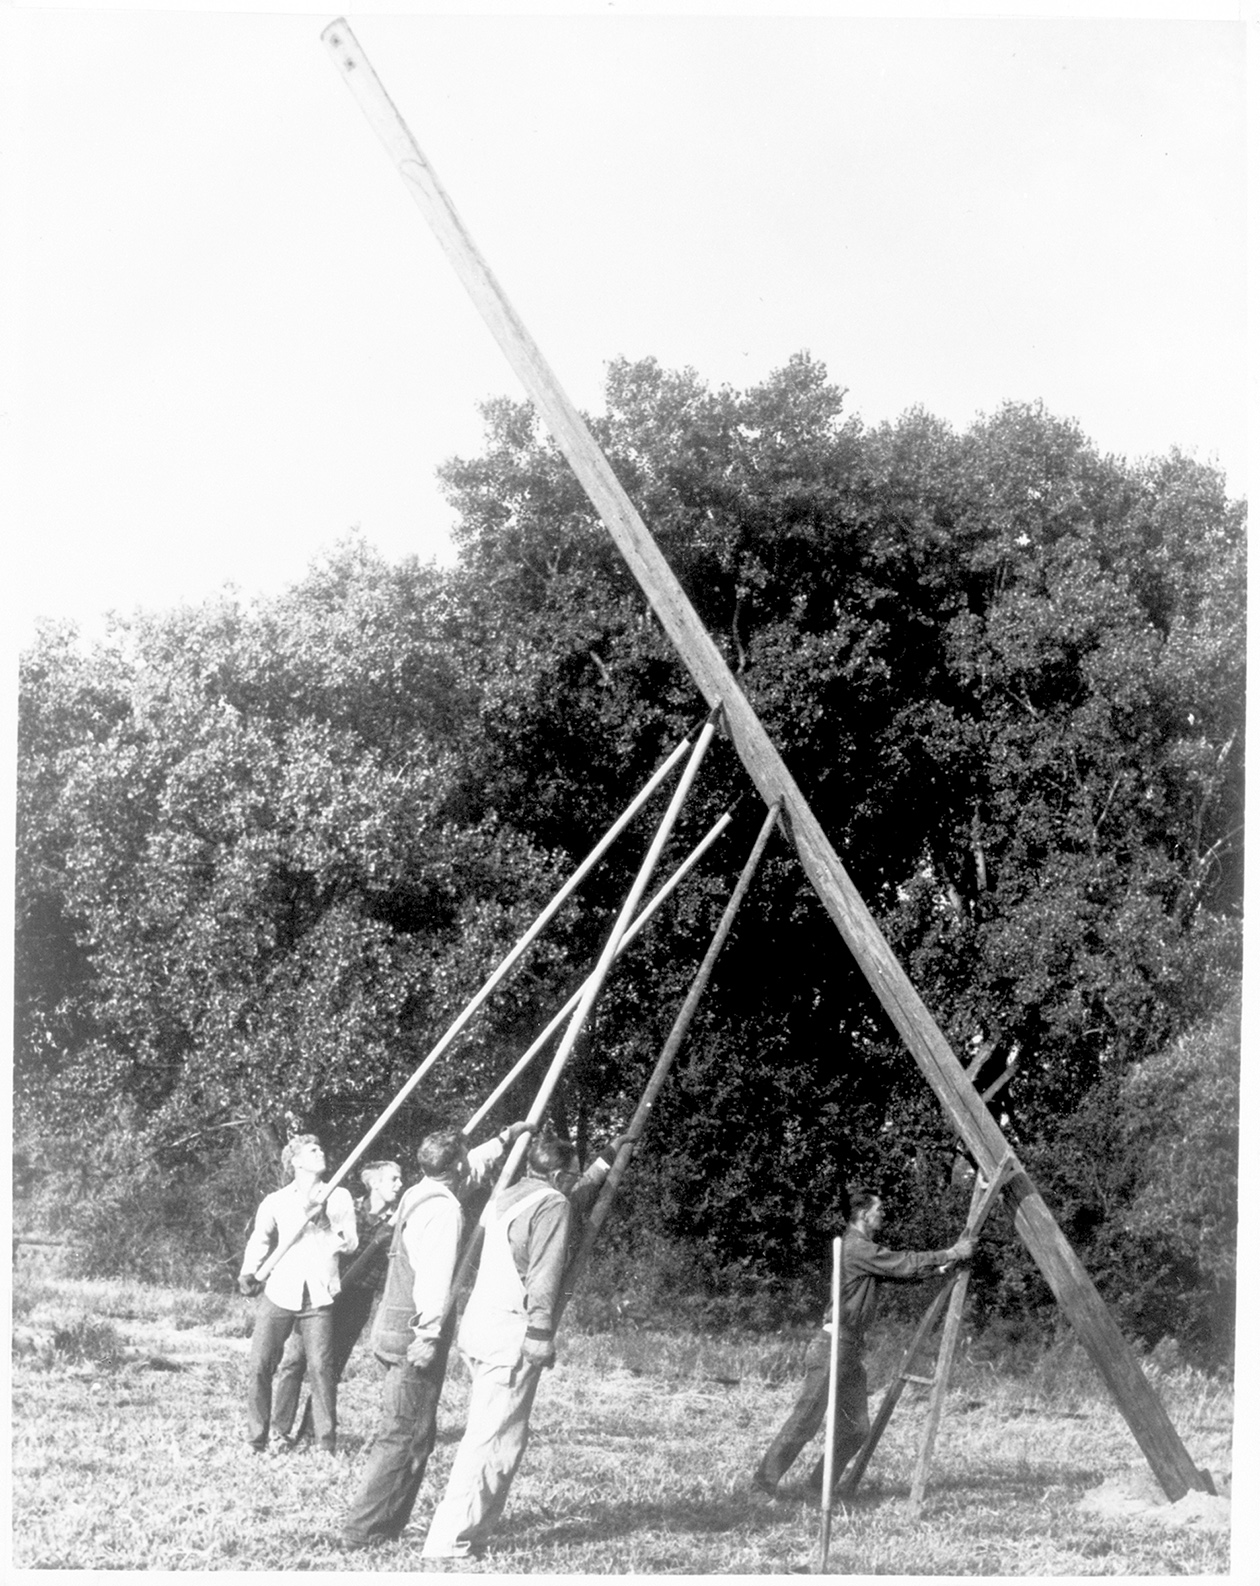 In the early days of electric co-ops, utility poles were put in place by hand – and a lot of hard work! Photo courtesy of NRECA